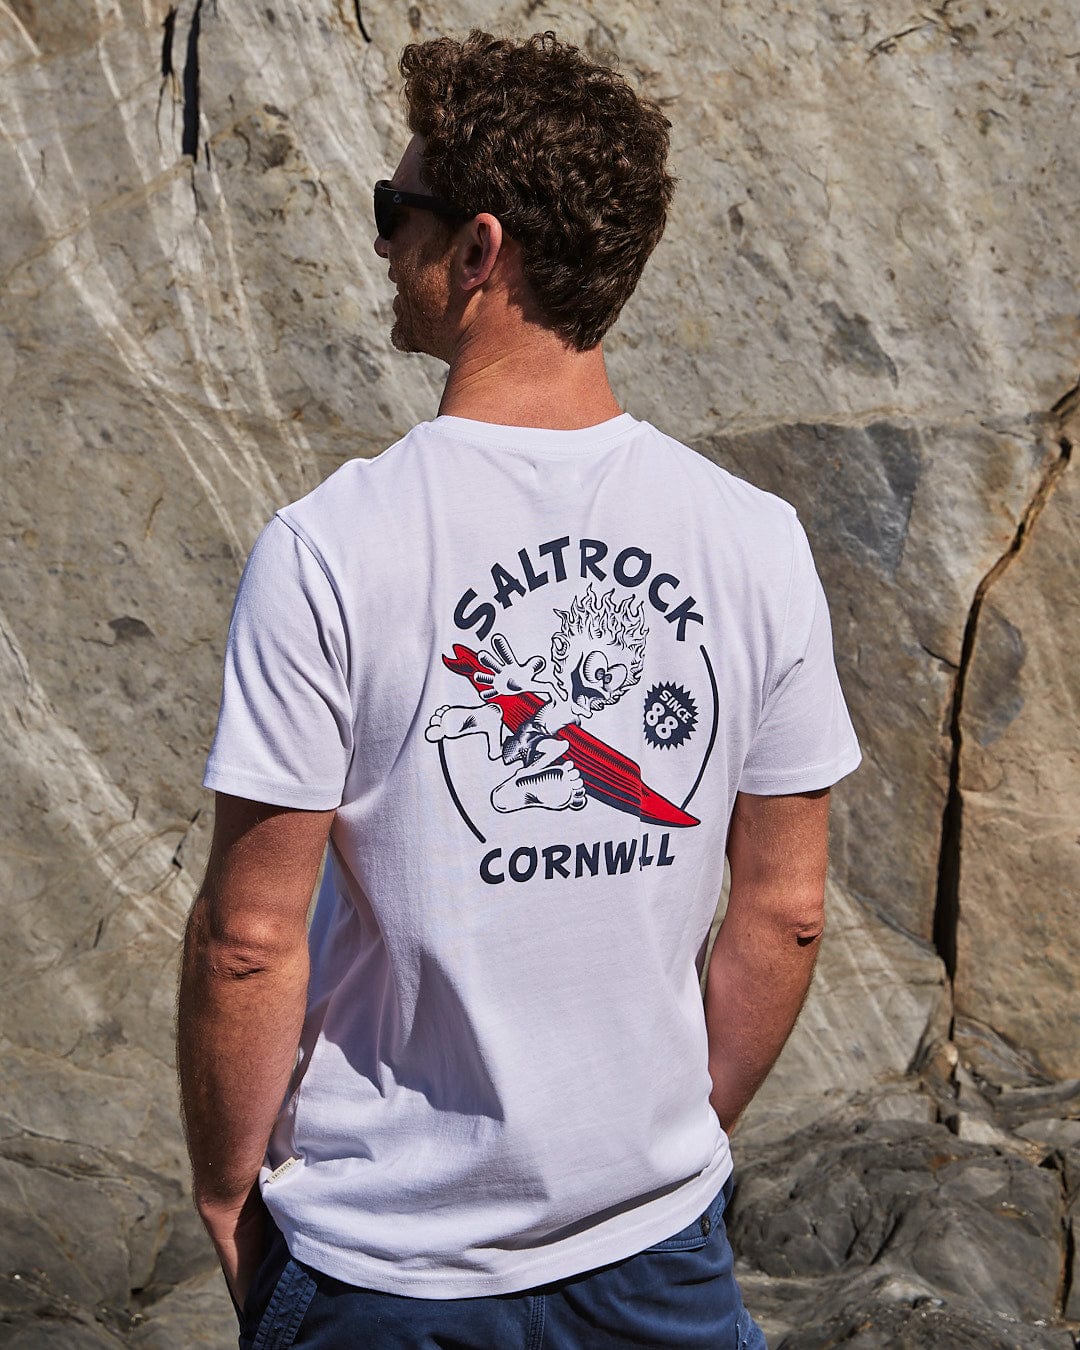 The back of a man wearing a Saltrock Wave Rider Cornwall - Mens Short Sleeve - White t-shirt.